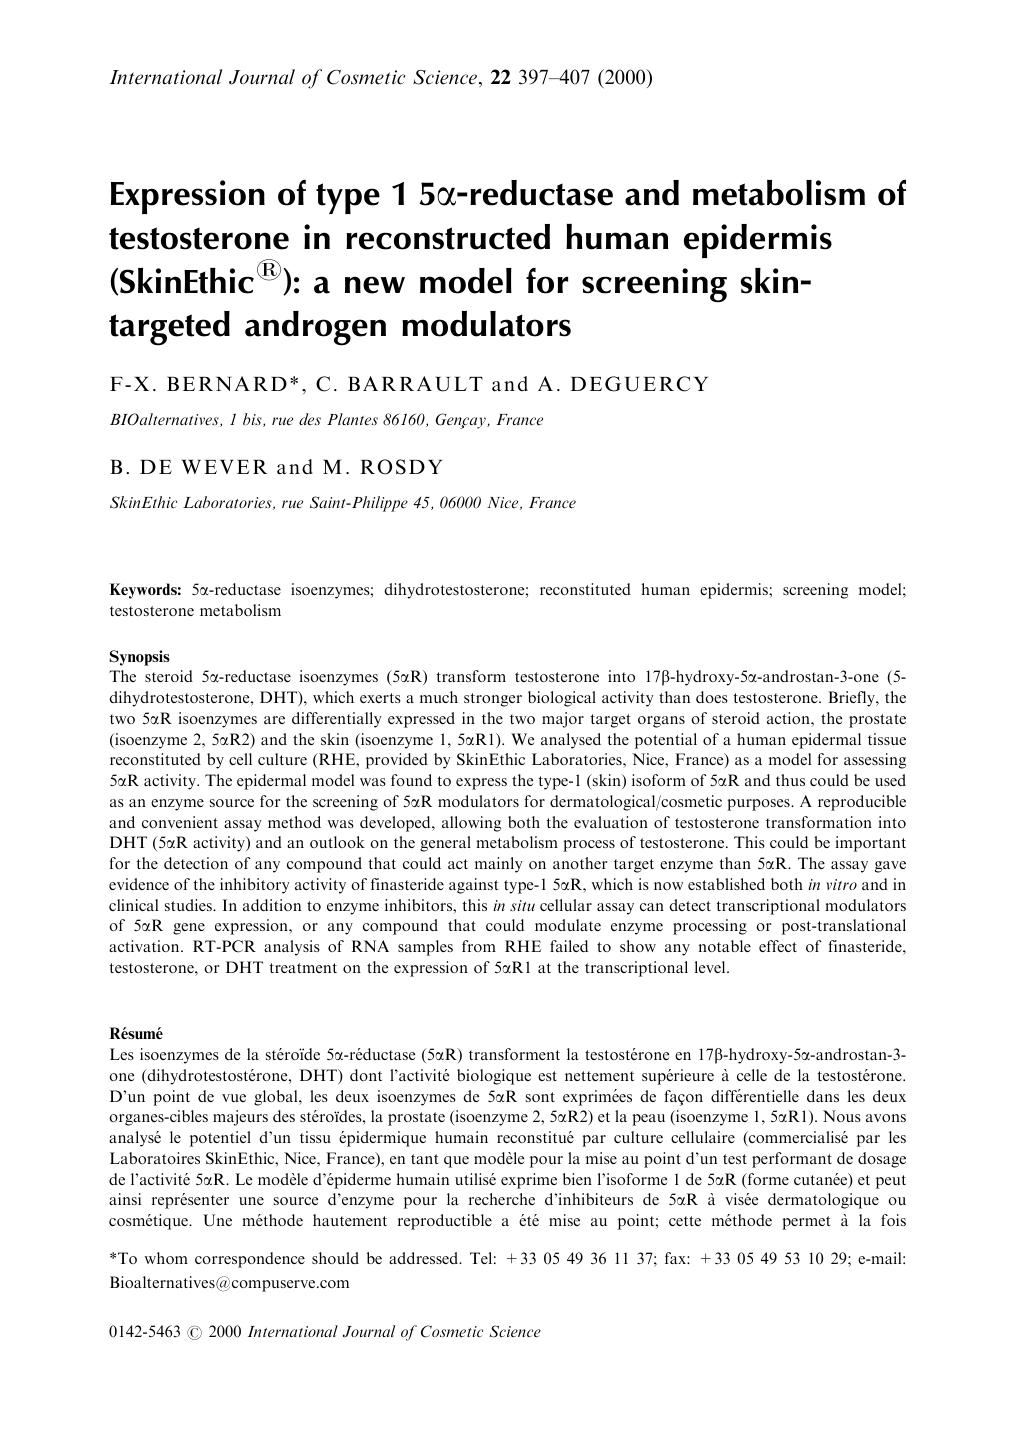 Expression of type 1 5Î±-reductase and metabolism of testosterone in reconstructed human epidermis (SkinEthicÂ®): a new model for screening skin-targeted androgen modulators by Unknown